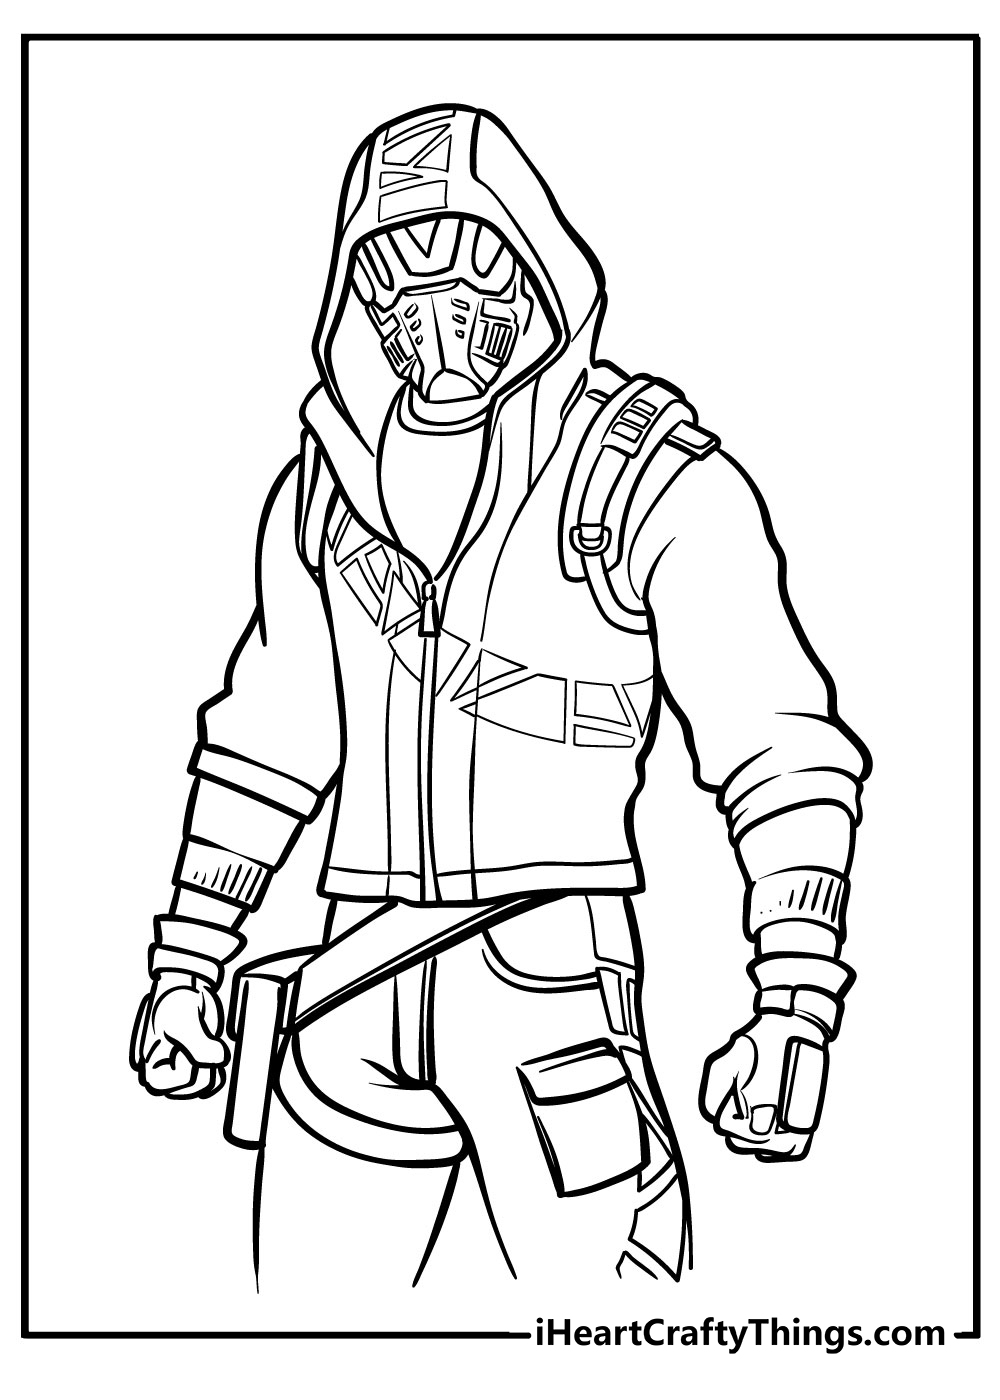 Printable Fortnite Coloring Pages Updated 20